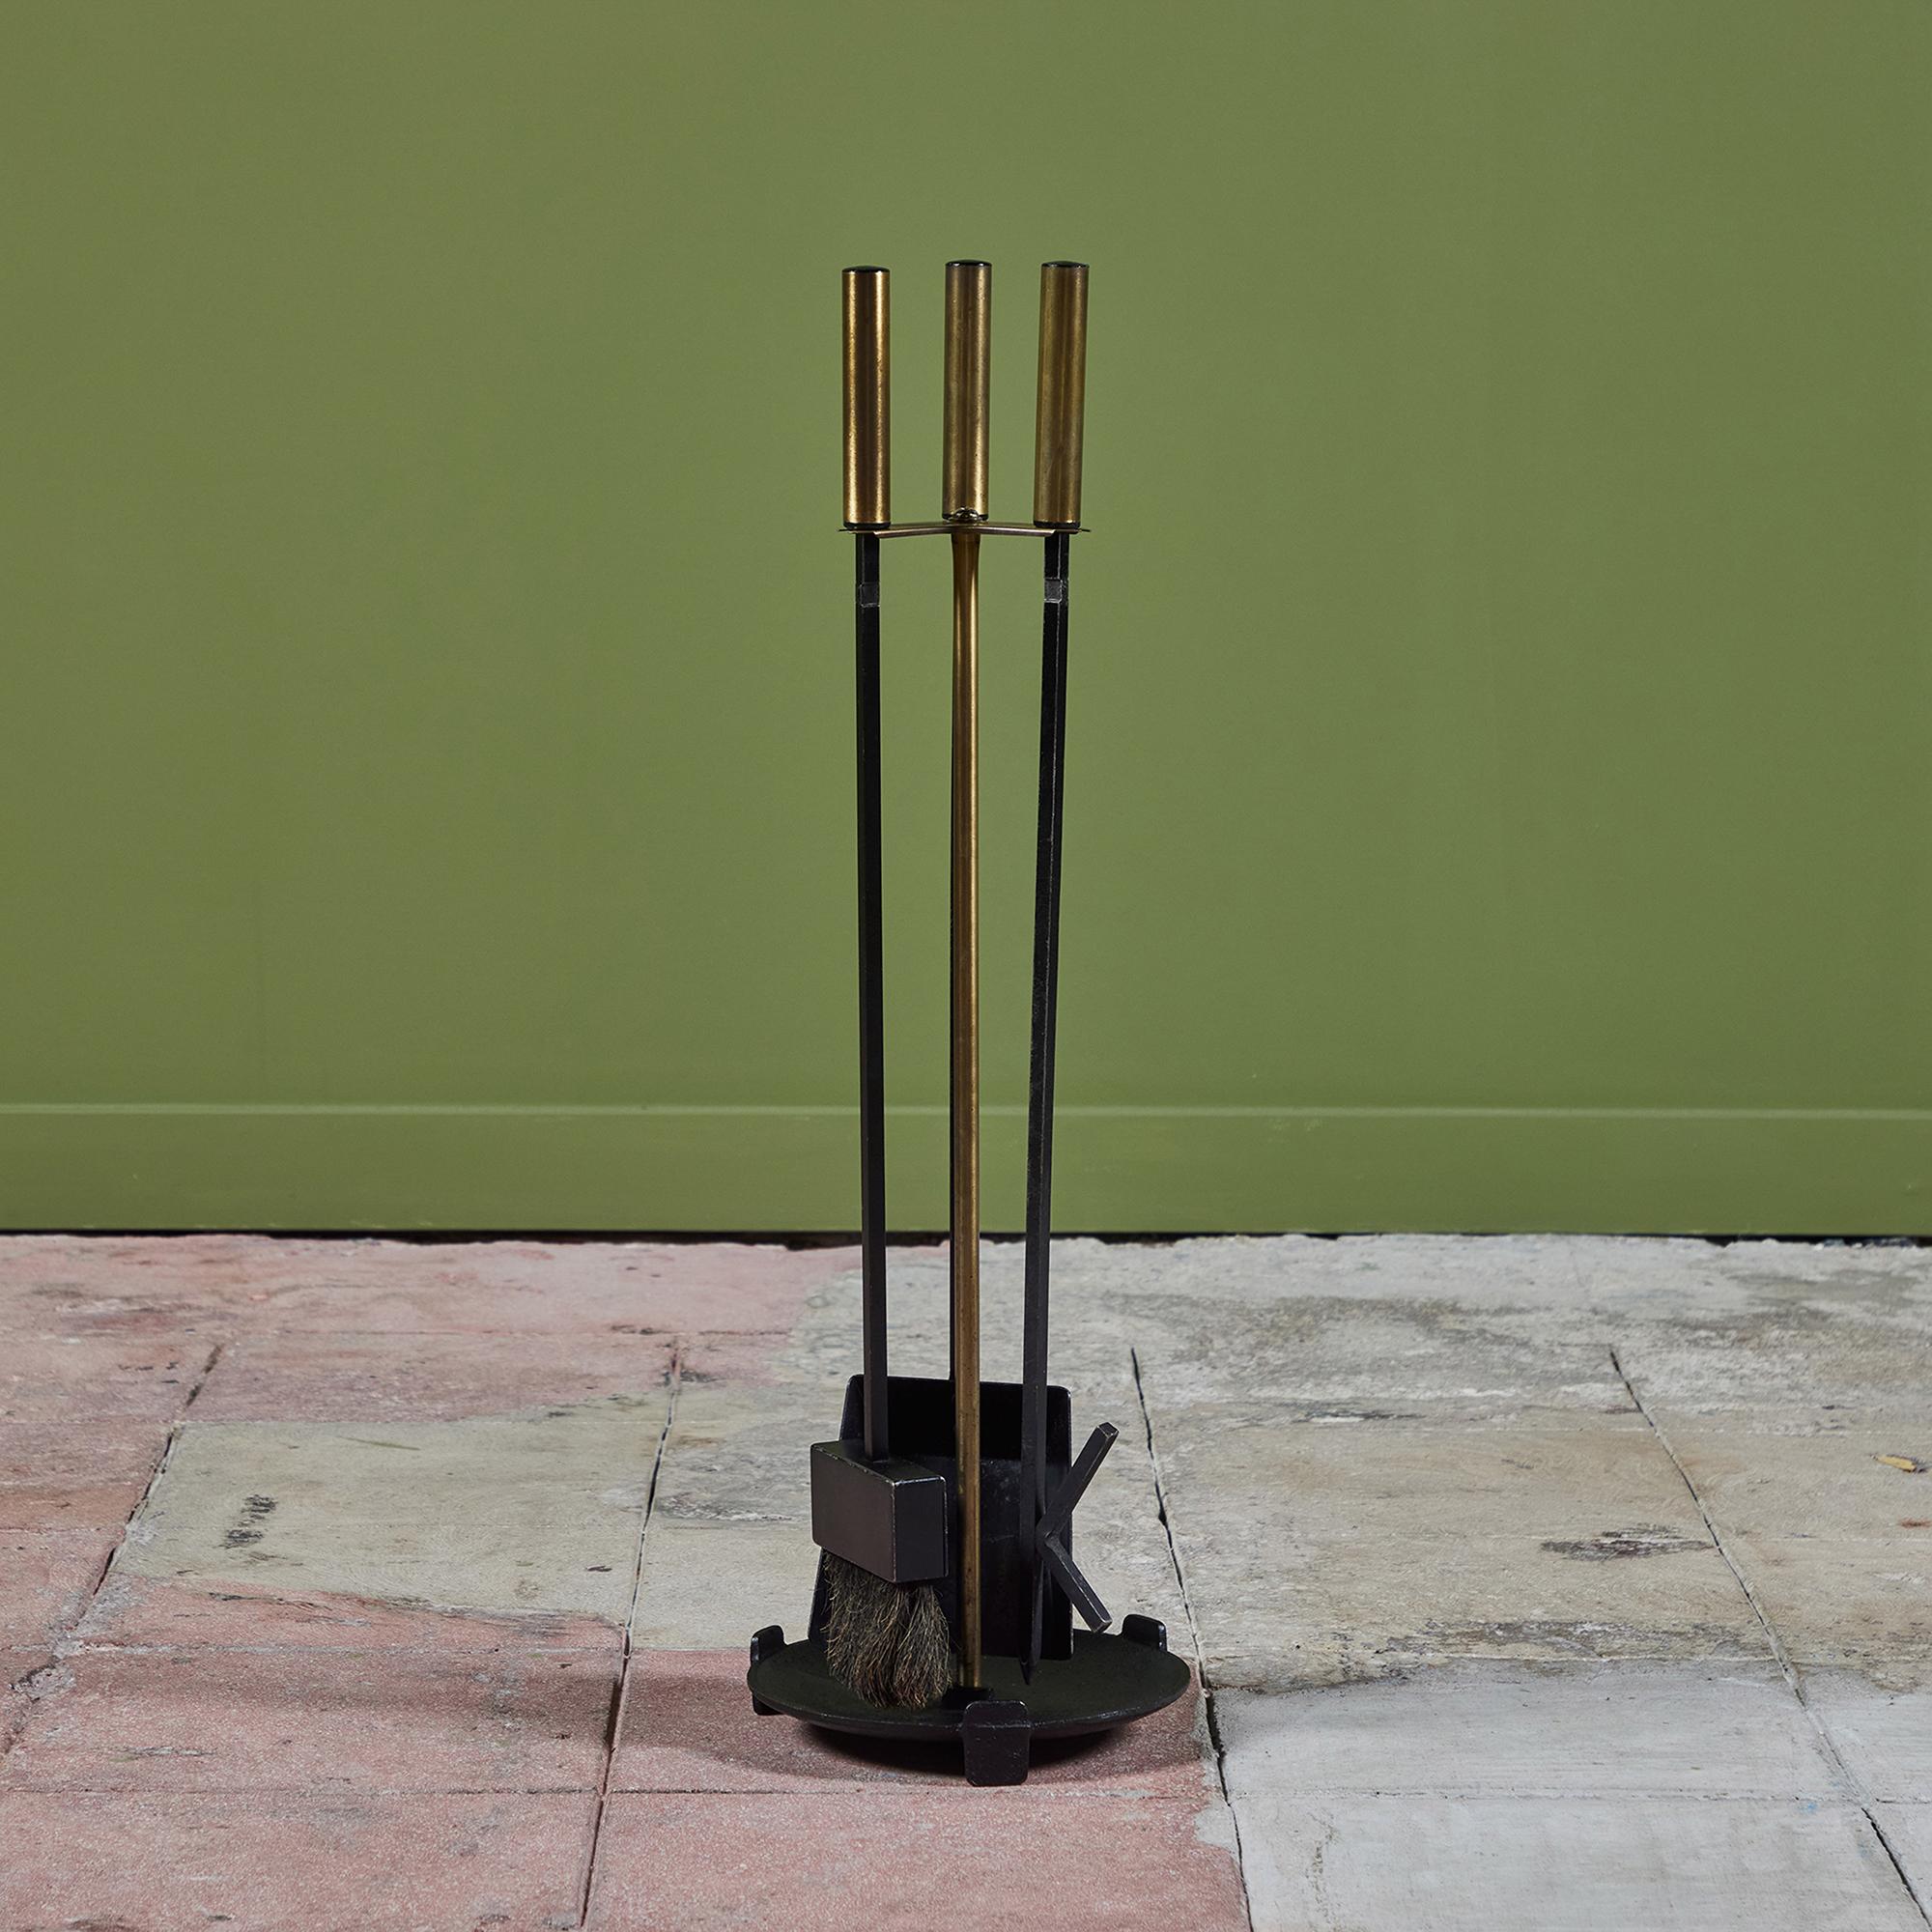 Three piece set of fireplace tools with stand. The set features three tools with cylindrical brass handles and matching rounded stand. All elements are made of blackened iron. This modernist piece shows off clean and minimal lines perfect for any